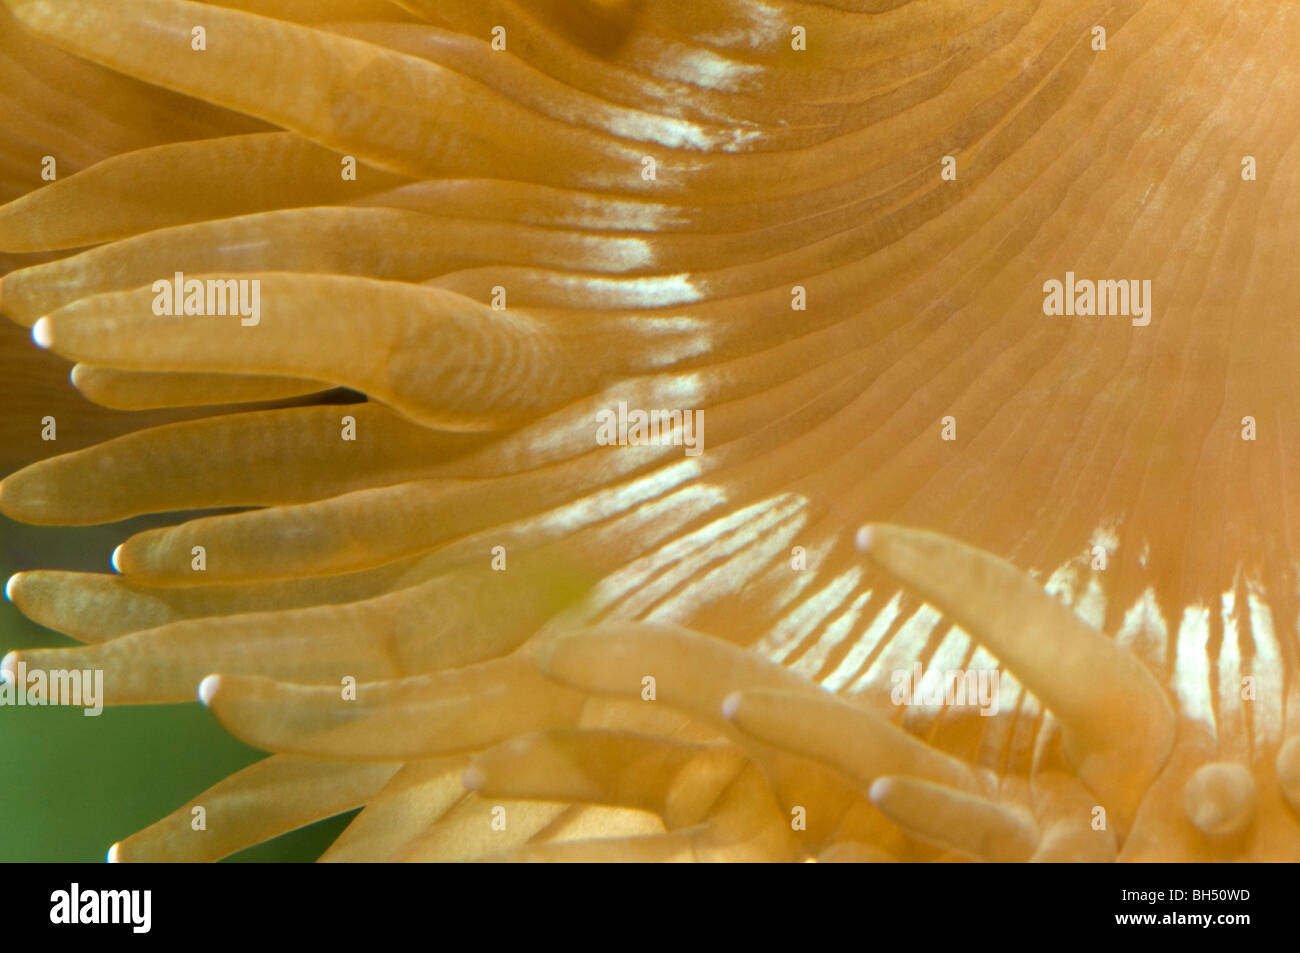 Close-up abstract of a section of sea anemone (Anthropleura species) in an aquarium. Stock Photo